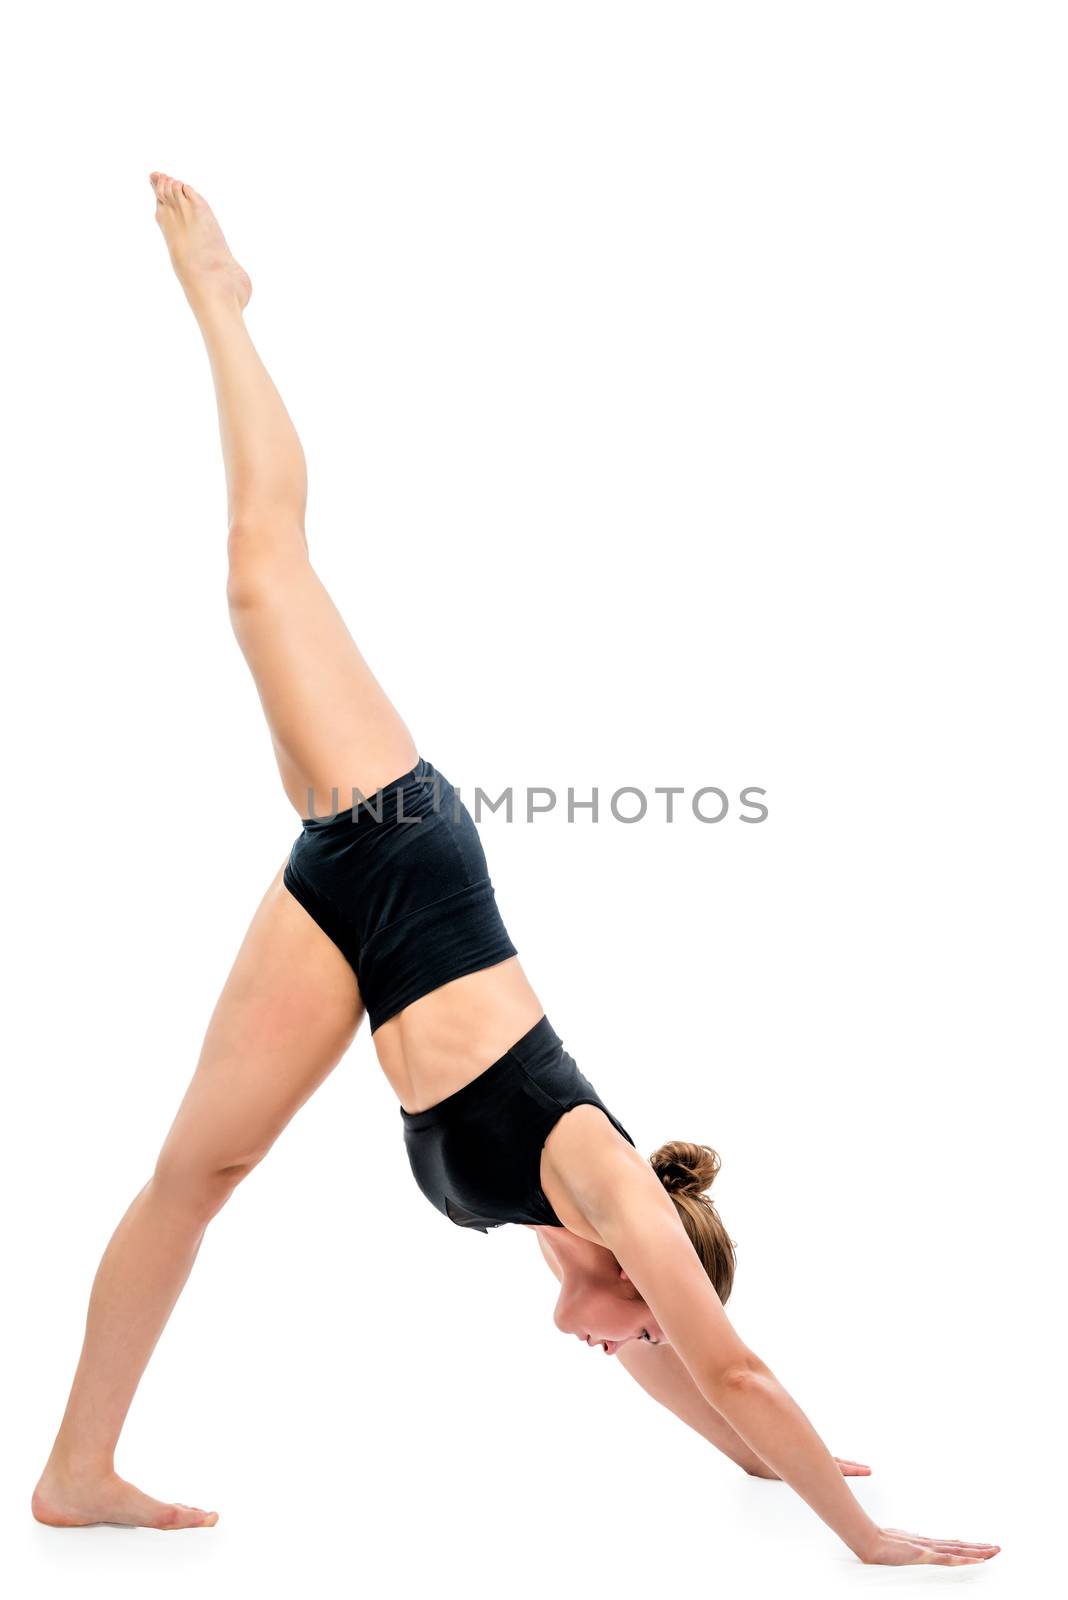 stretching exercises by a young woman on a white background by kosmsos111